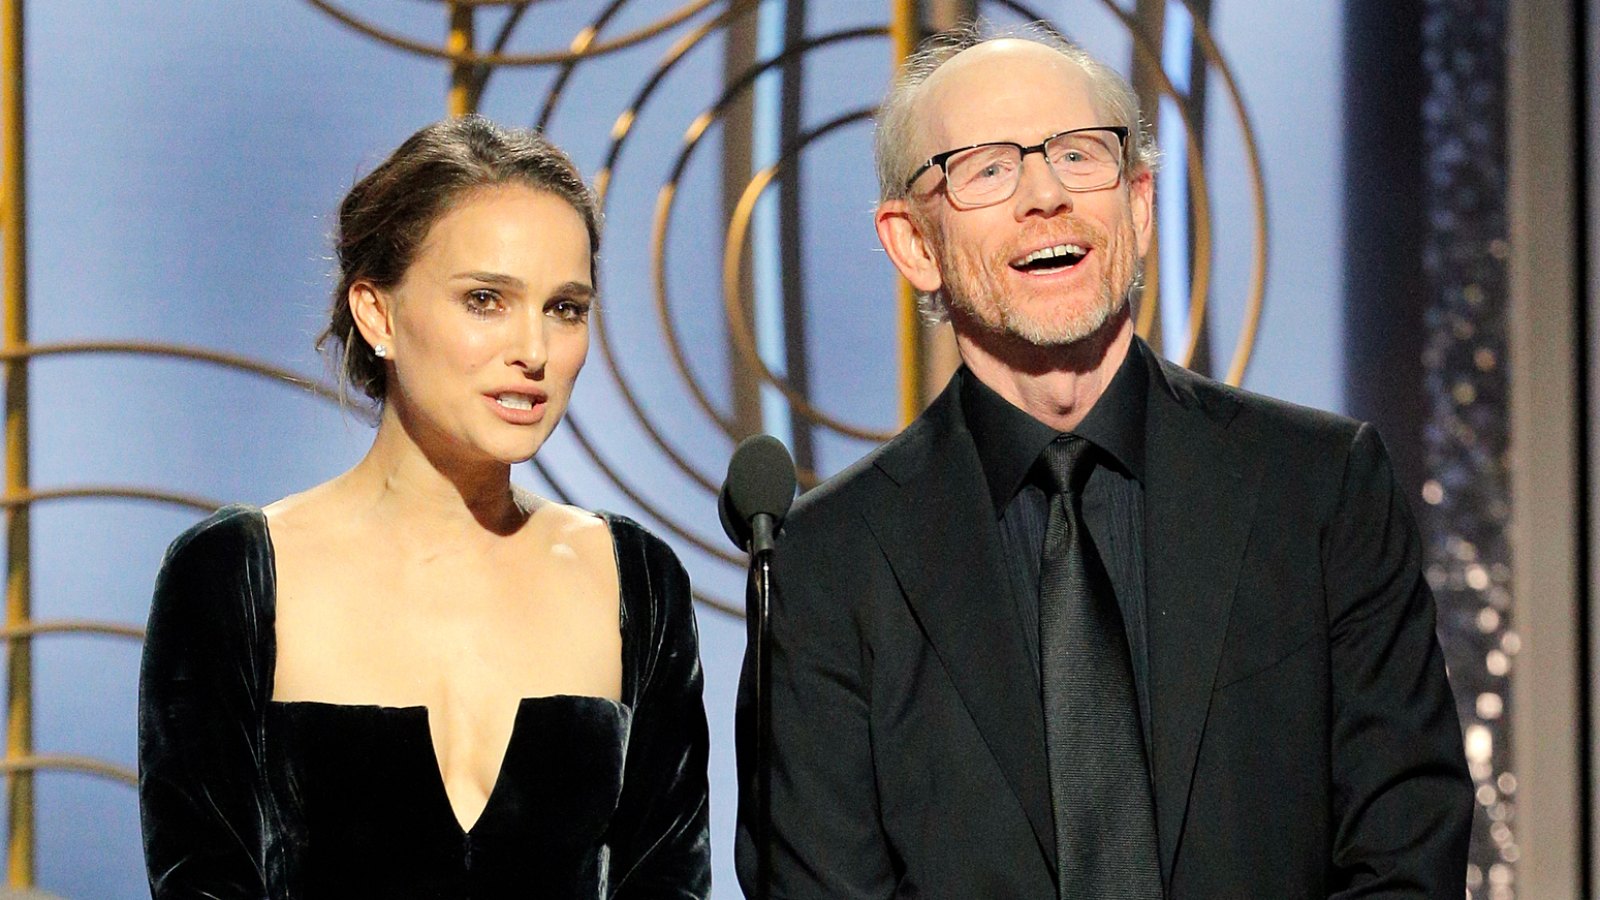 Natalie Portman Introduces All-Male Nominees for Best Director at Golden Globes 2018